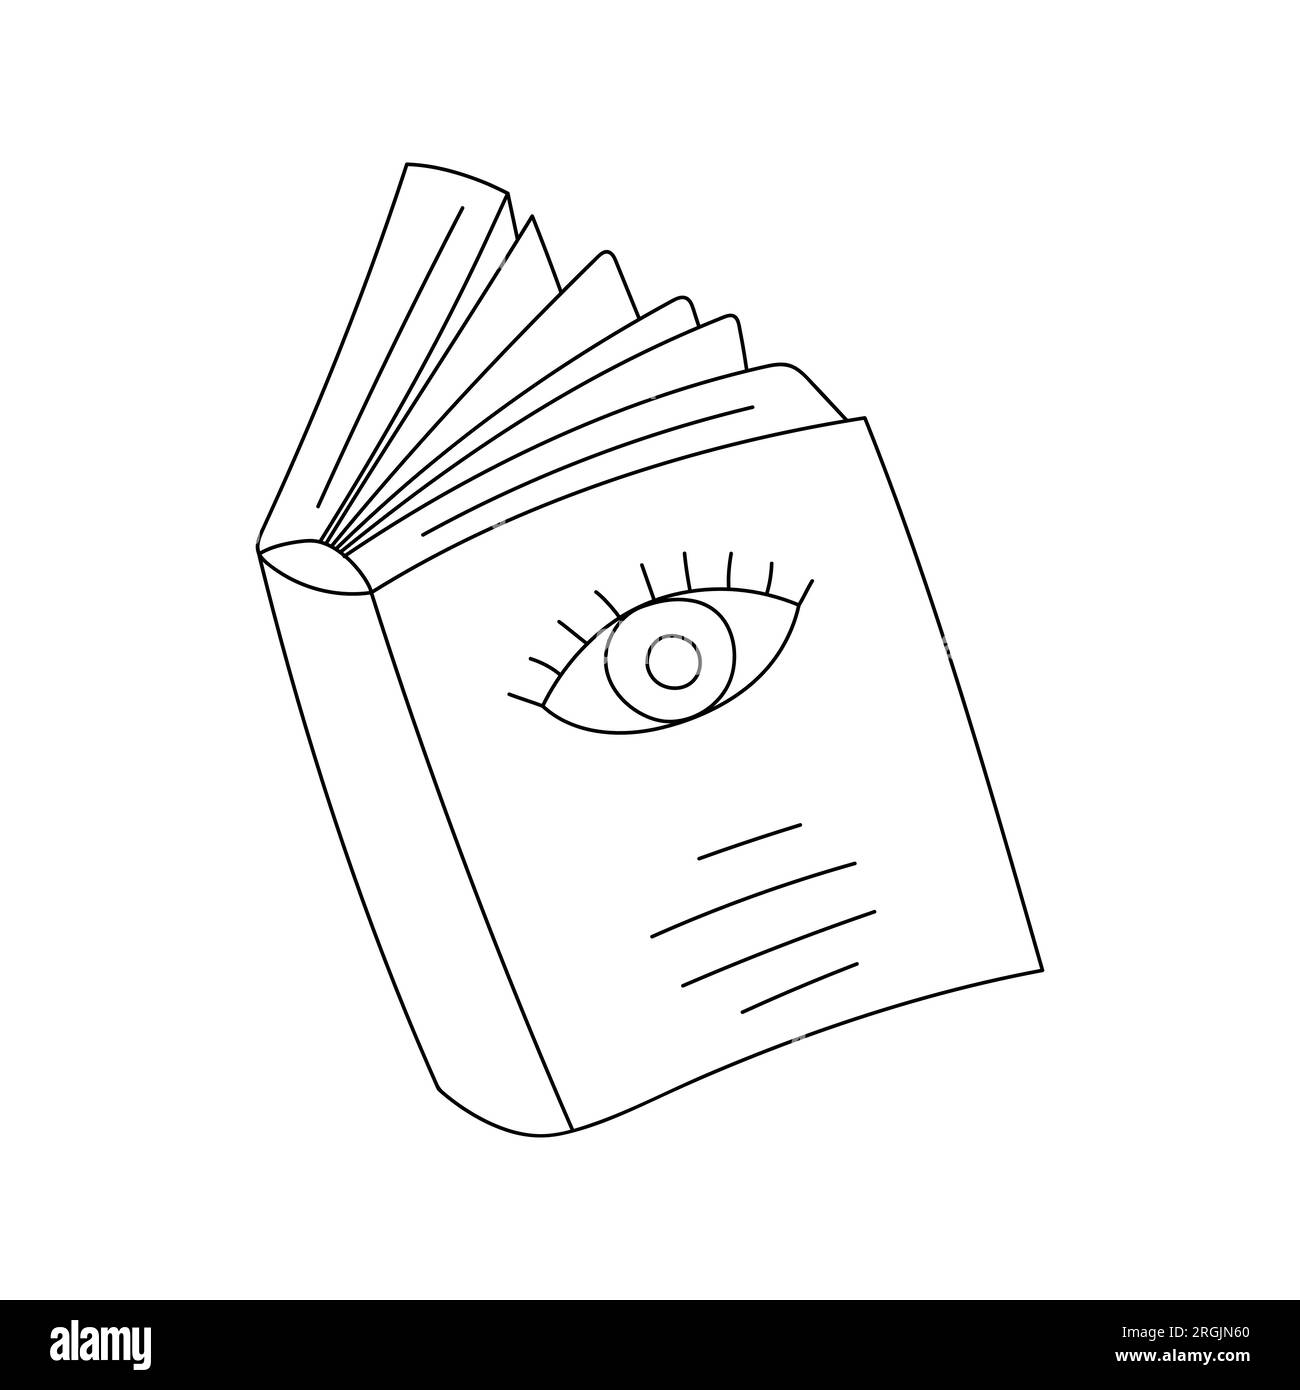 Outline doodle open hardcover book with eye on cover. A symbol of learning, education. Literature, reading. Hand drawn black and white vector illustra Stock Vector